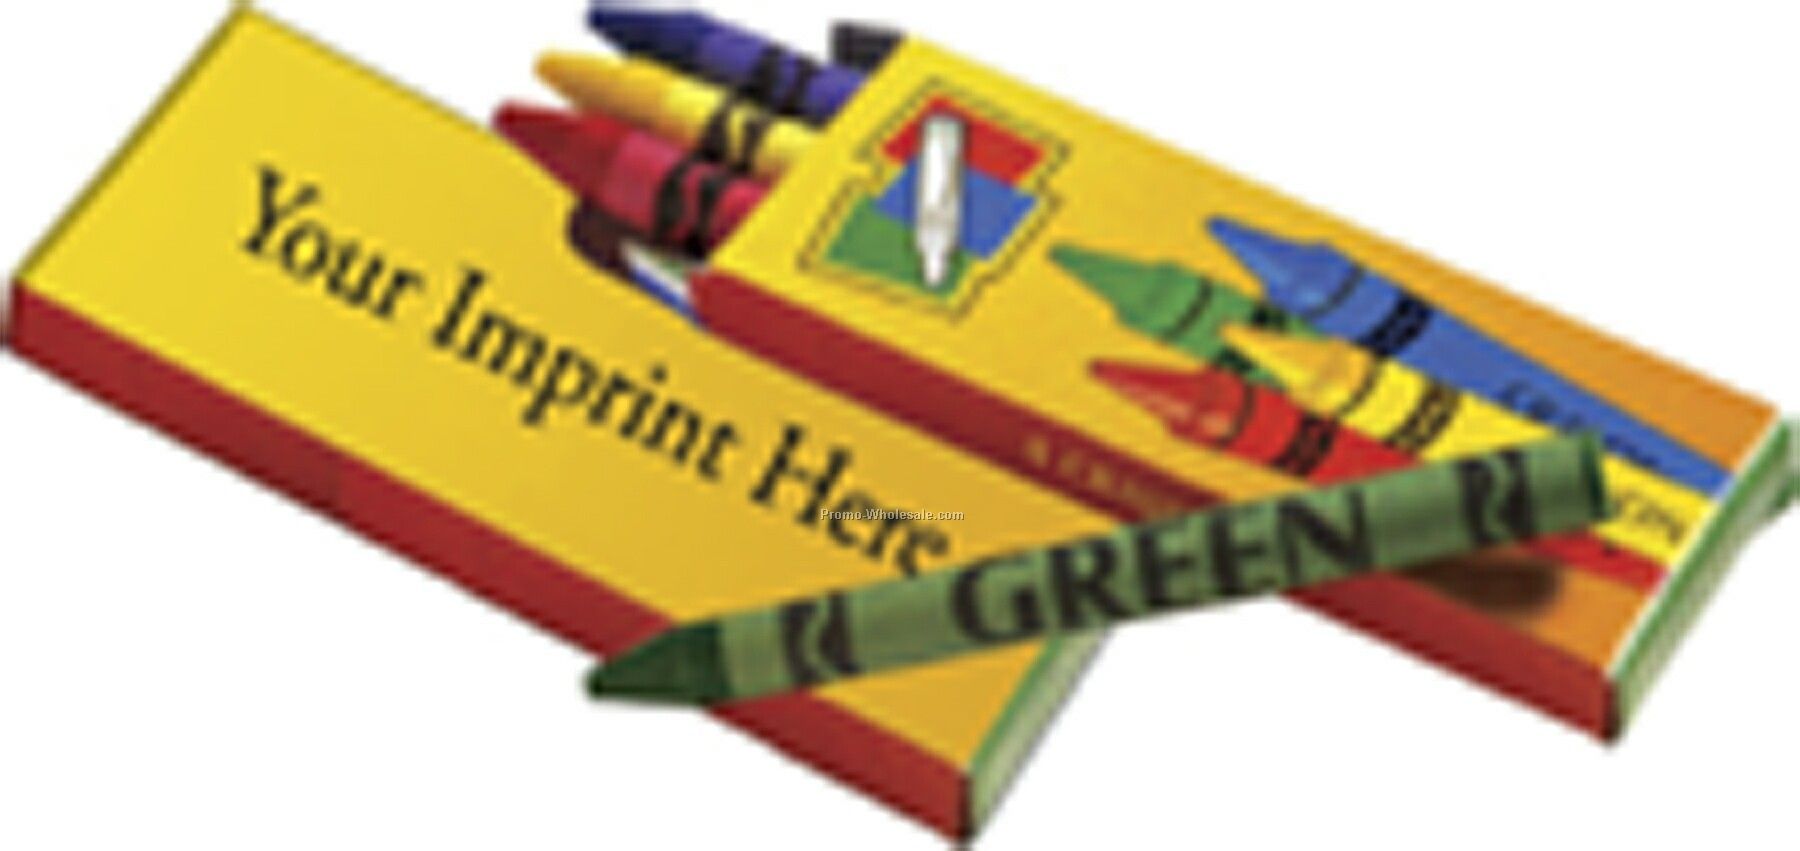 Stop Look & Learn Non-toxic Crayons - Imprinted